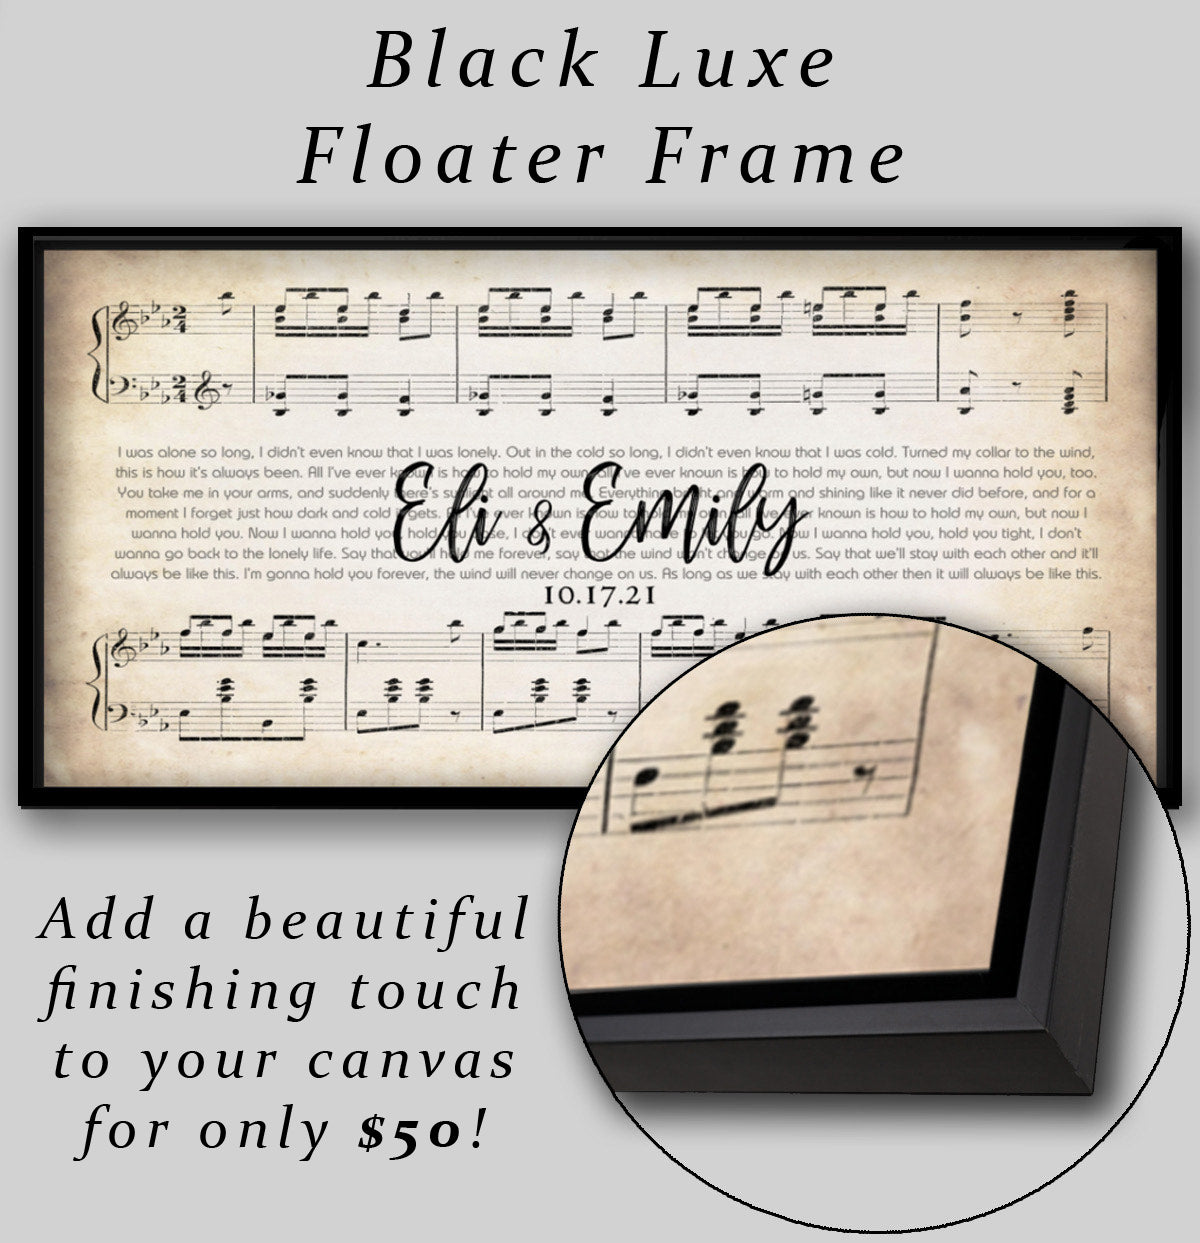 Exclusive Luxury Black Floater Frame Canvas Upgrade